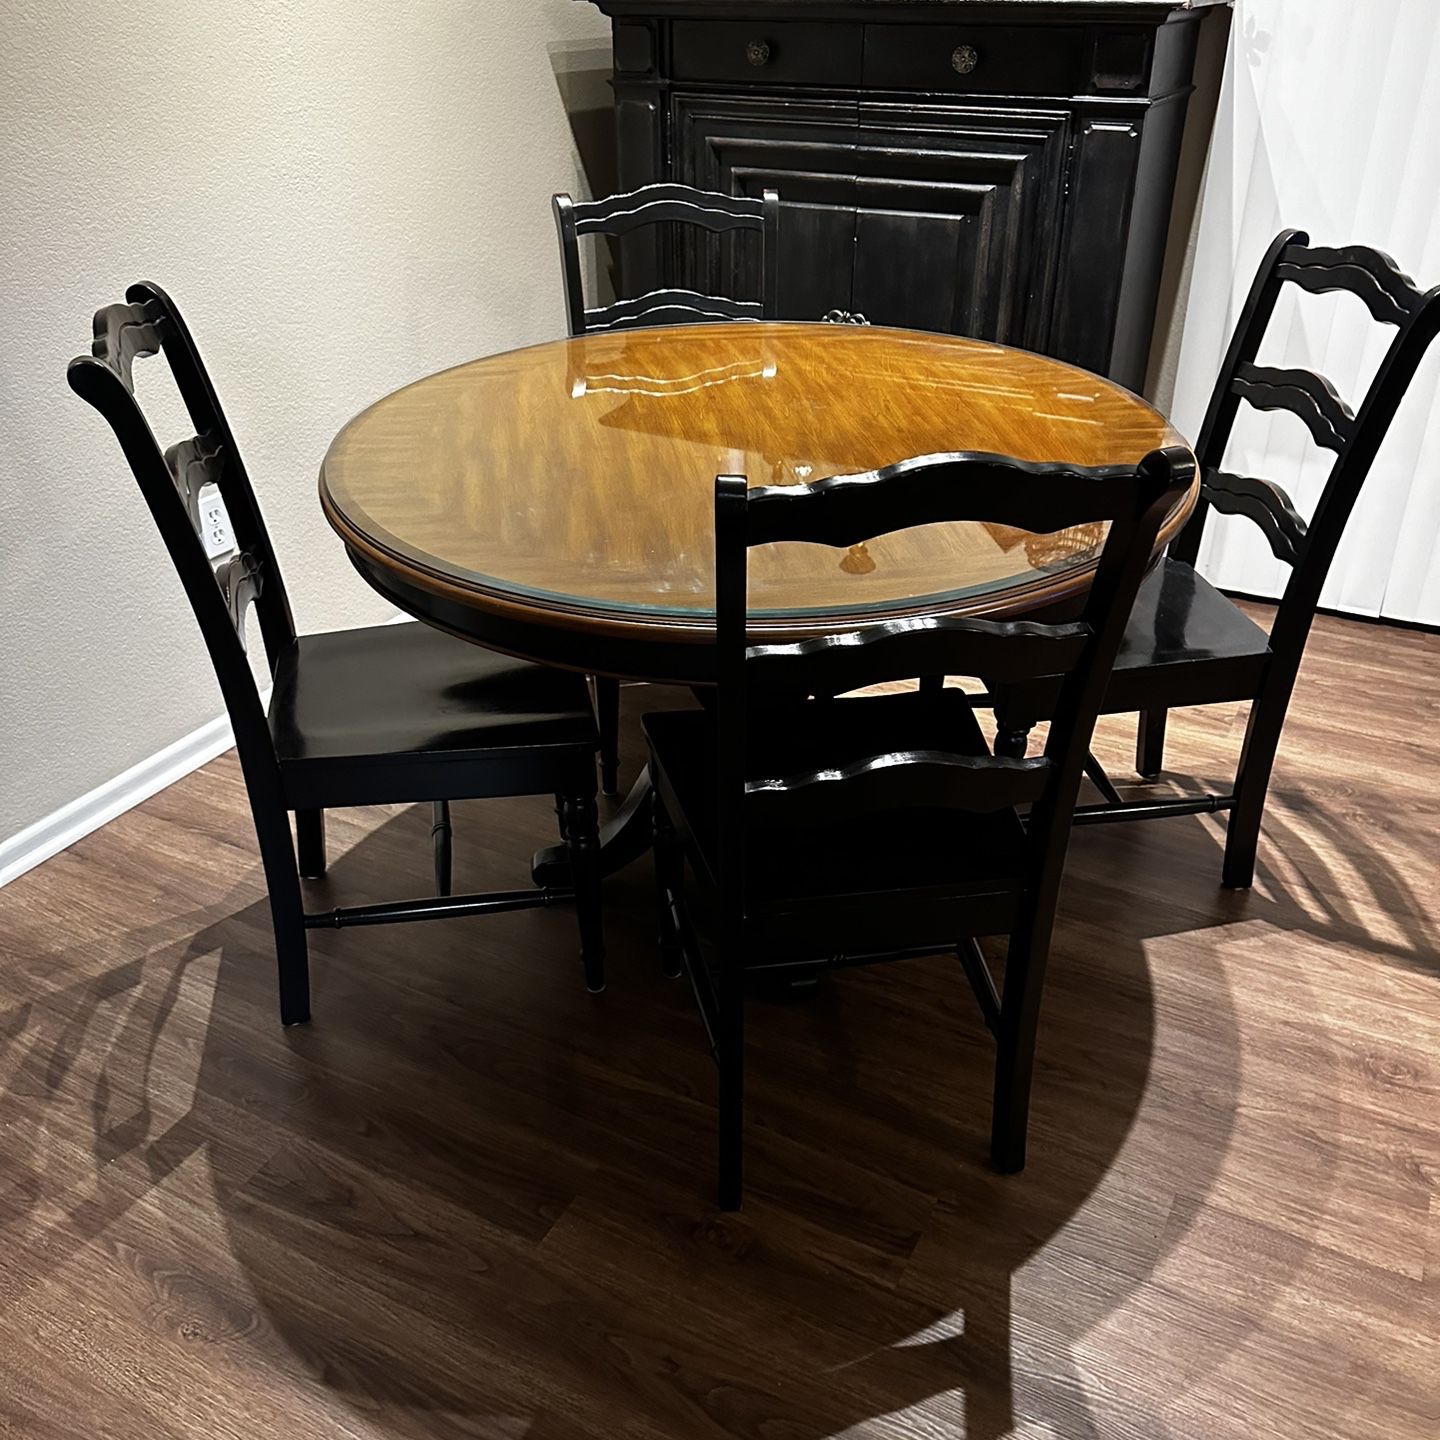 48” Round Dining Table And Chairs 